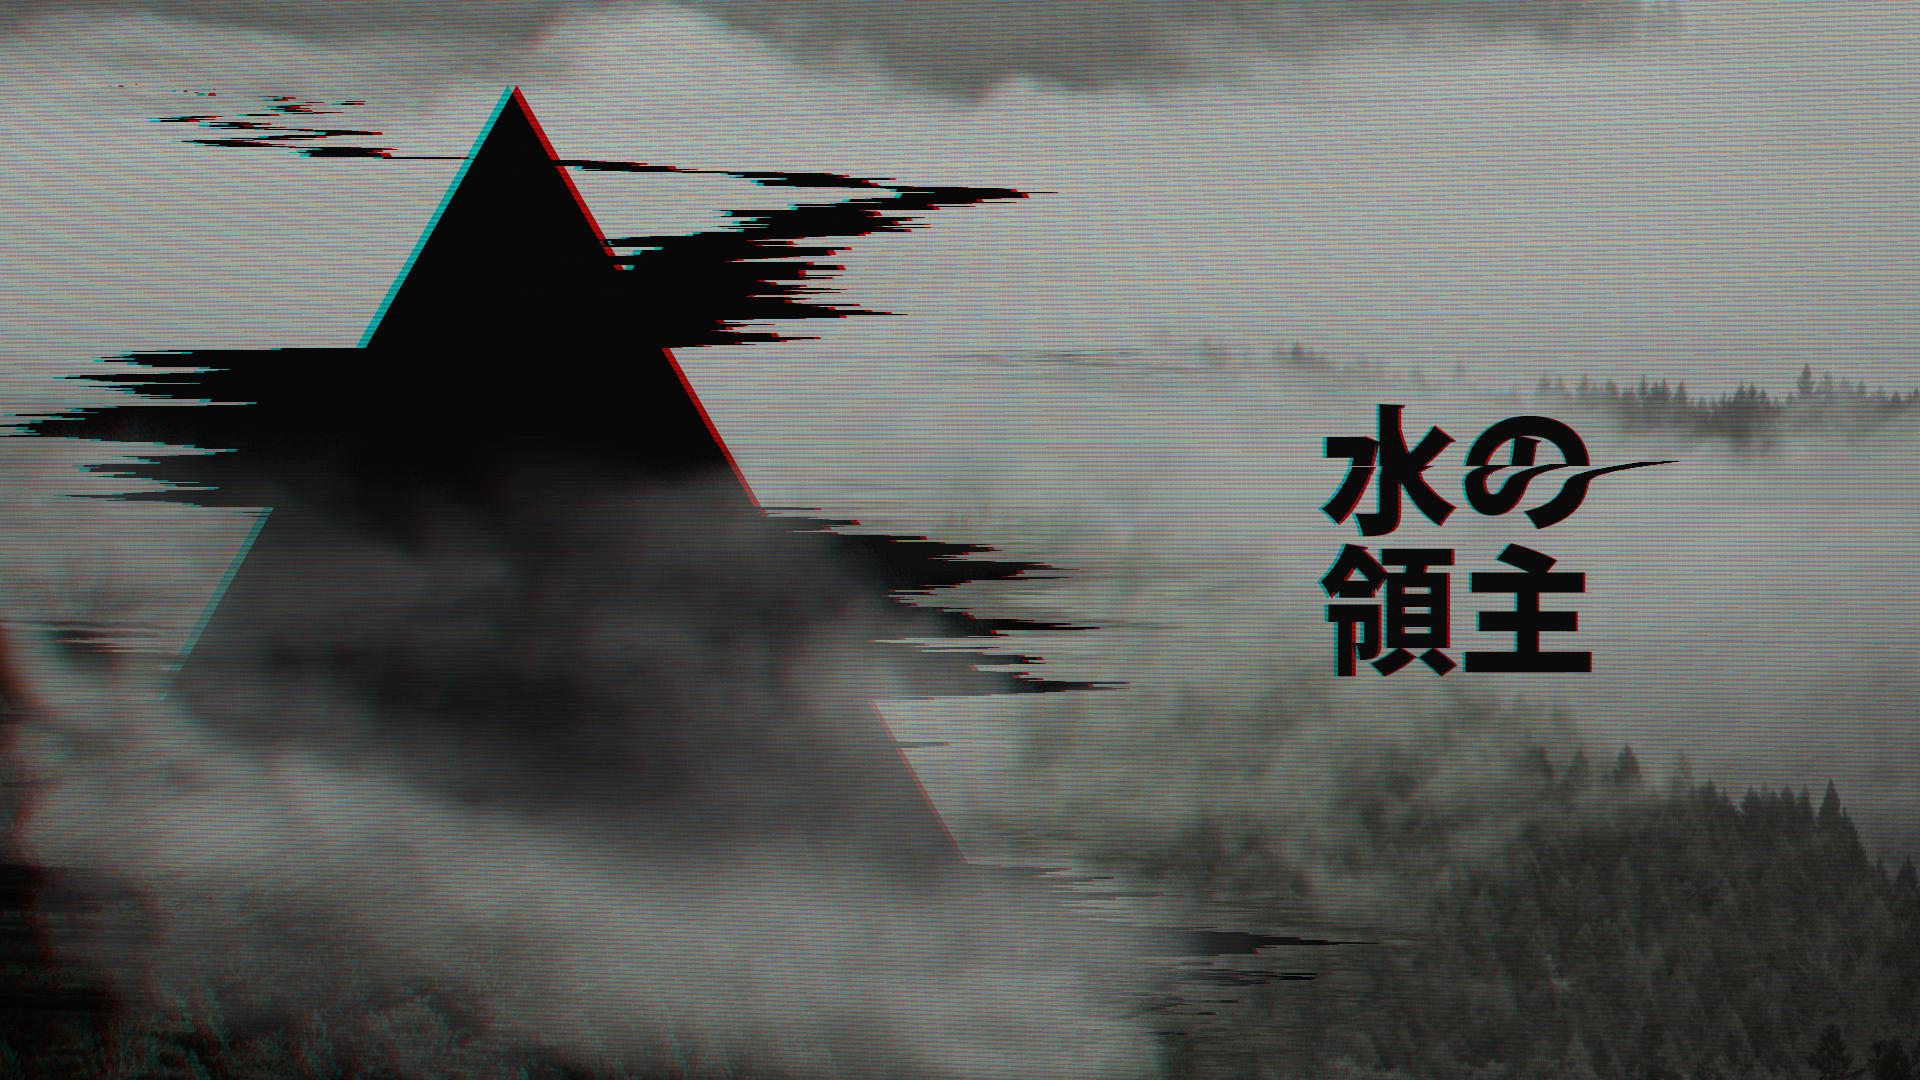 A triangle is shown in the image. - Witchcore, dark vaporwave